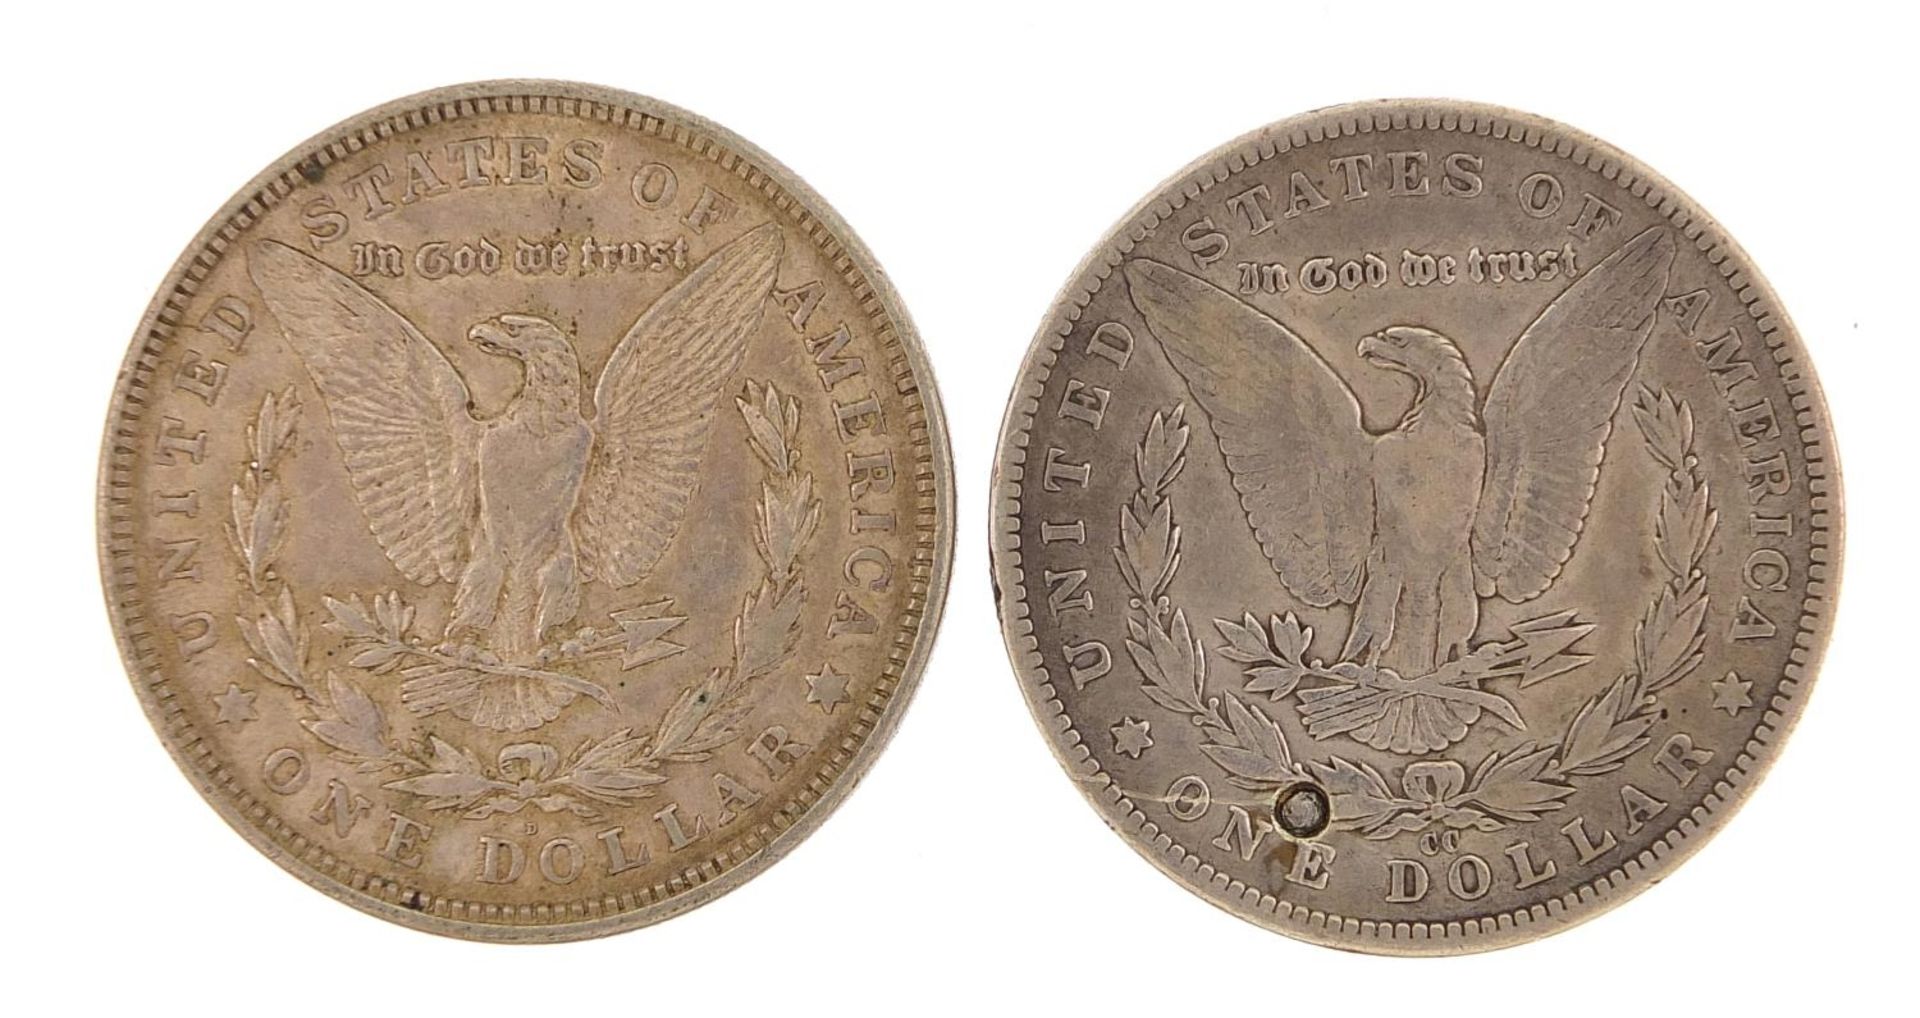 Two American dollars comprising dates 1892 and 1921